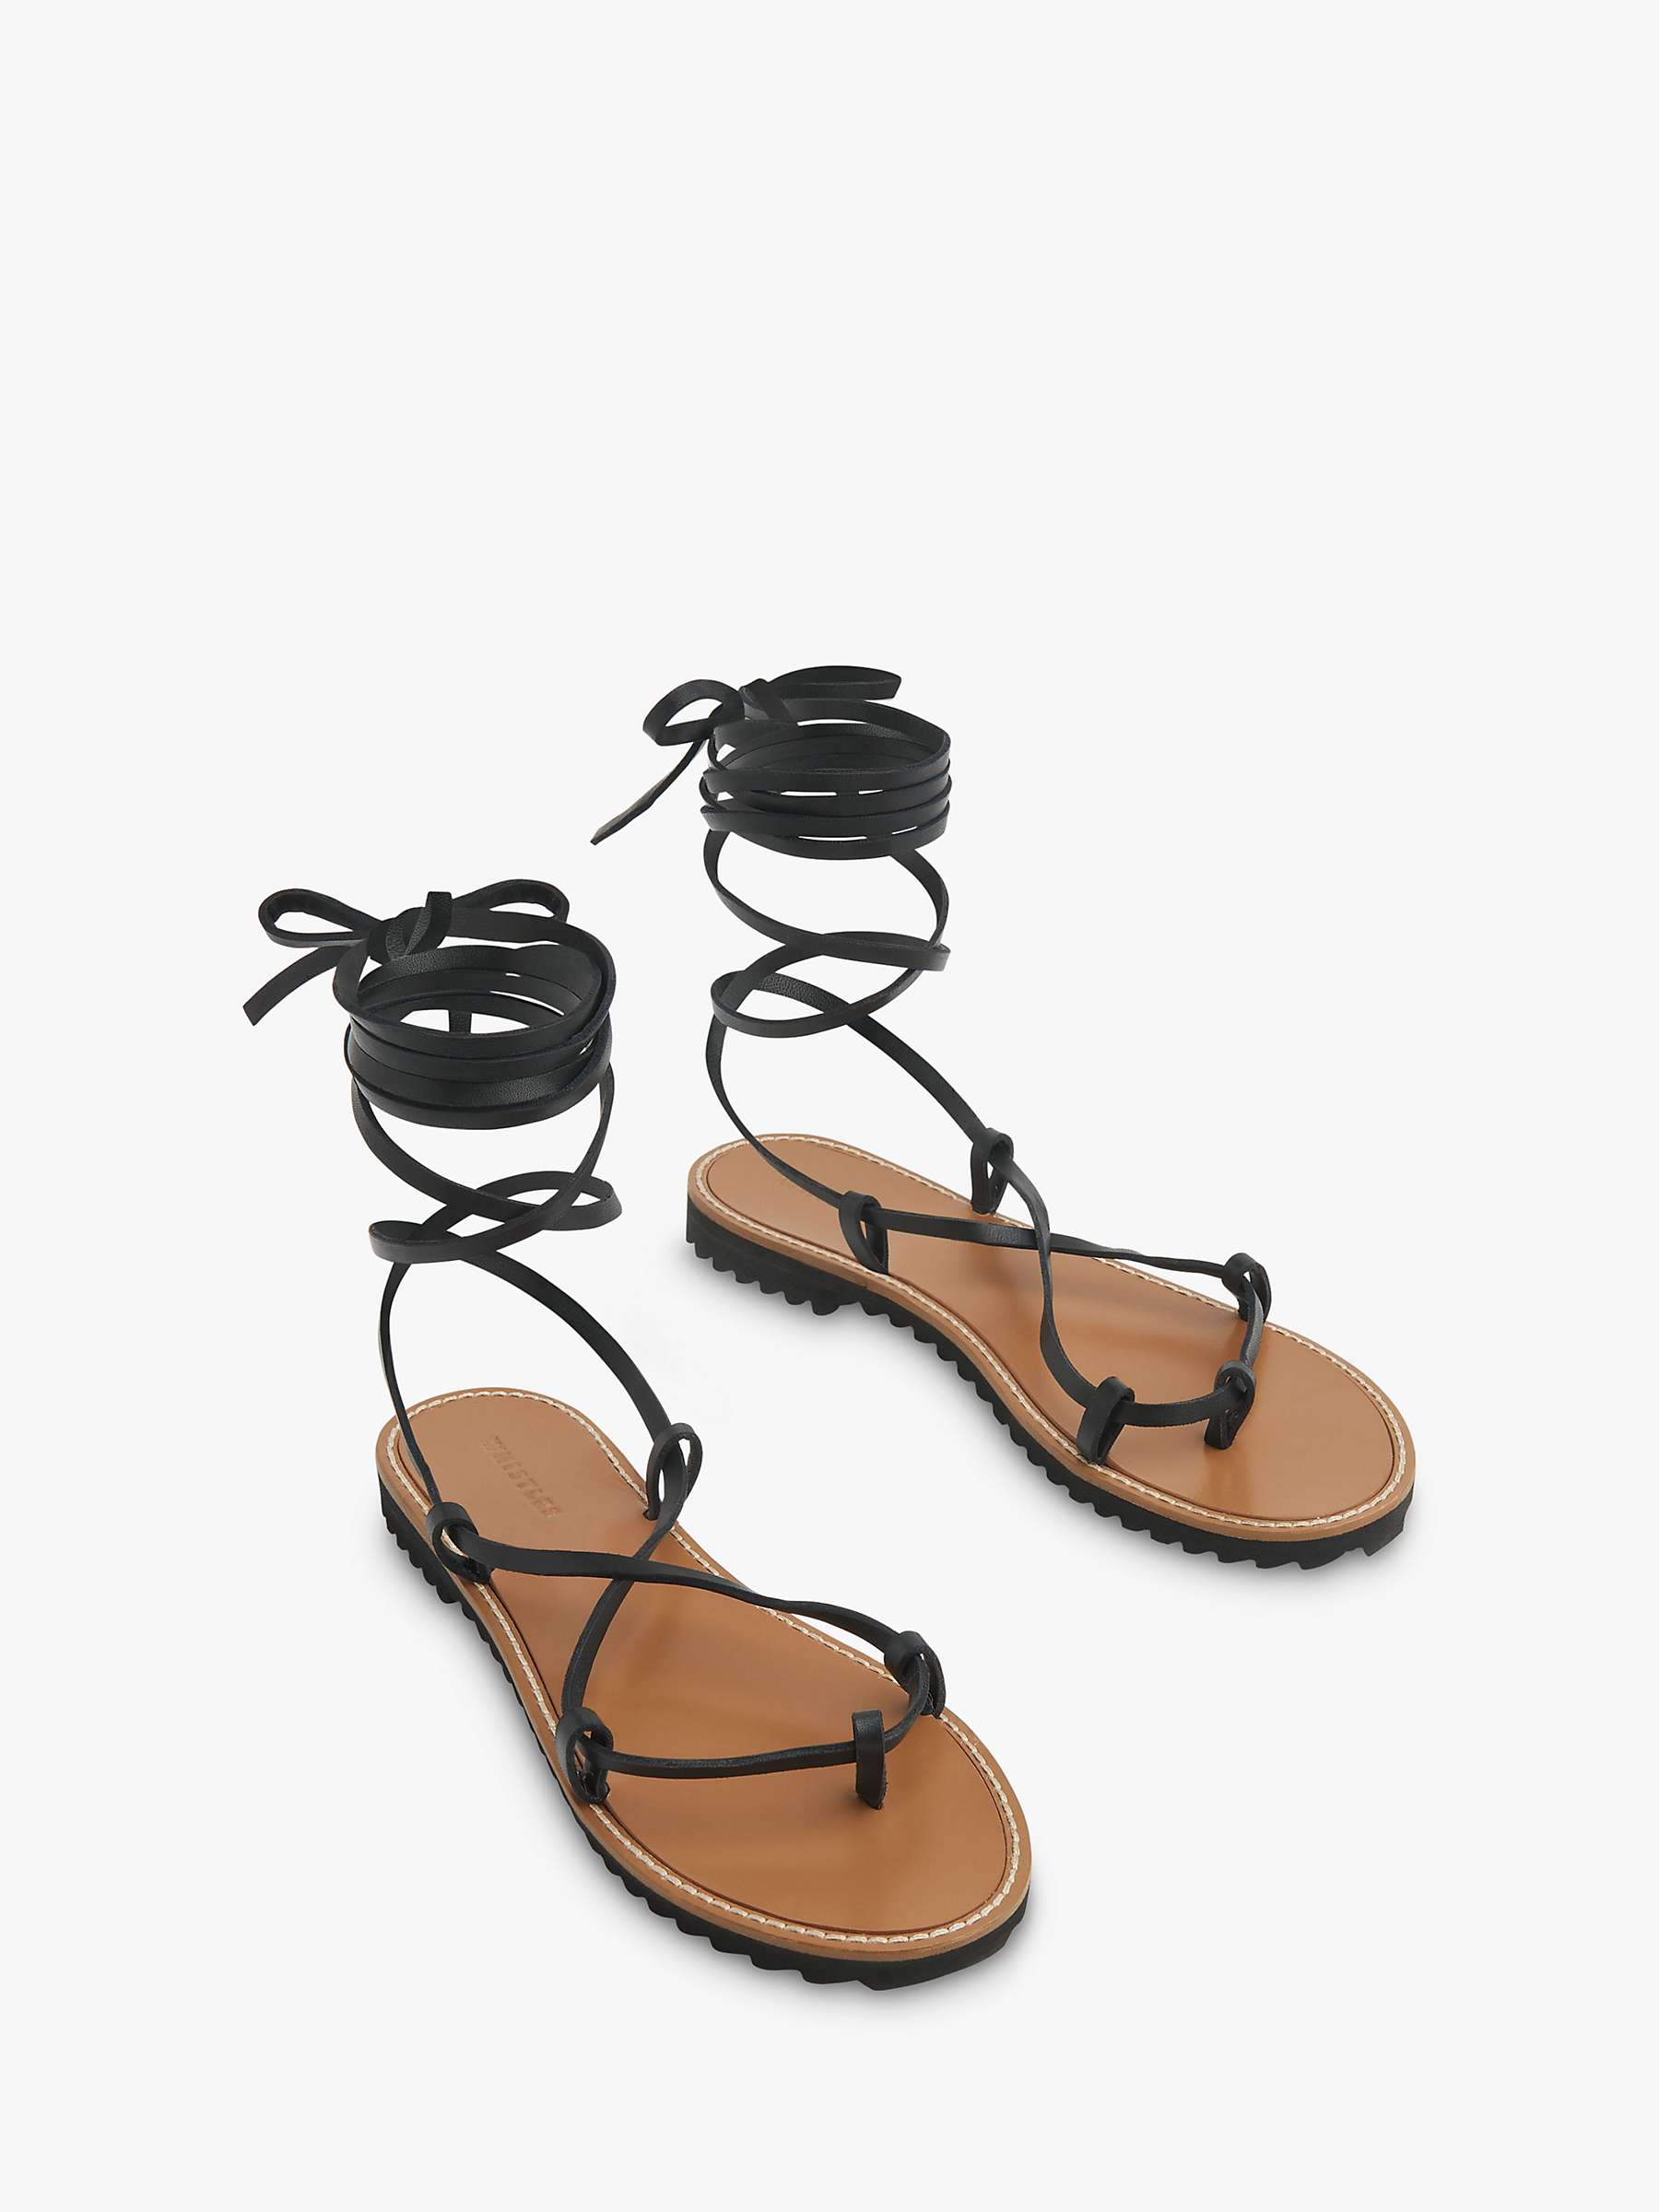 Buy Whistles Willow Leather Strappy Tie Sandals, Black Online at johnlewis.com